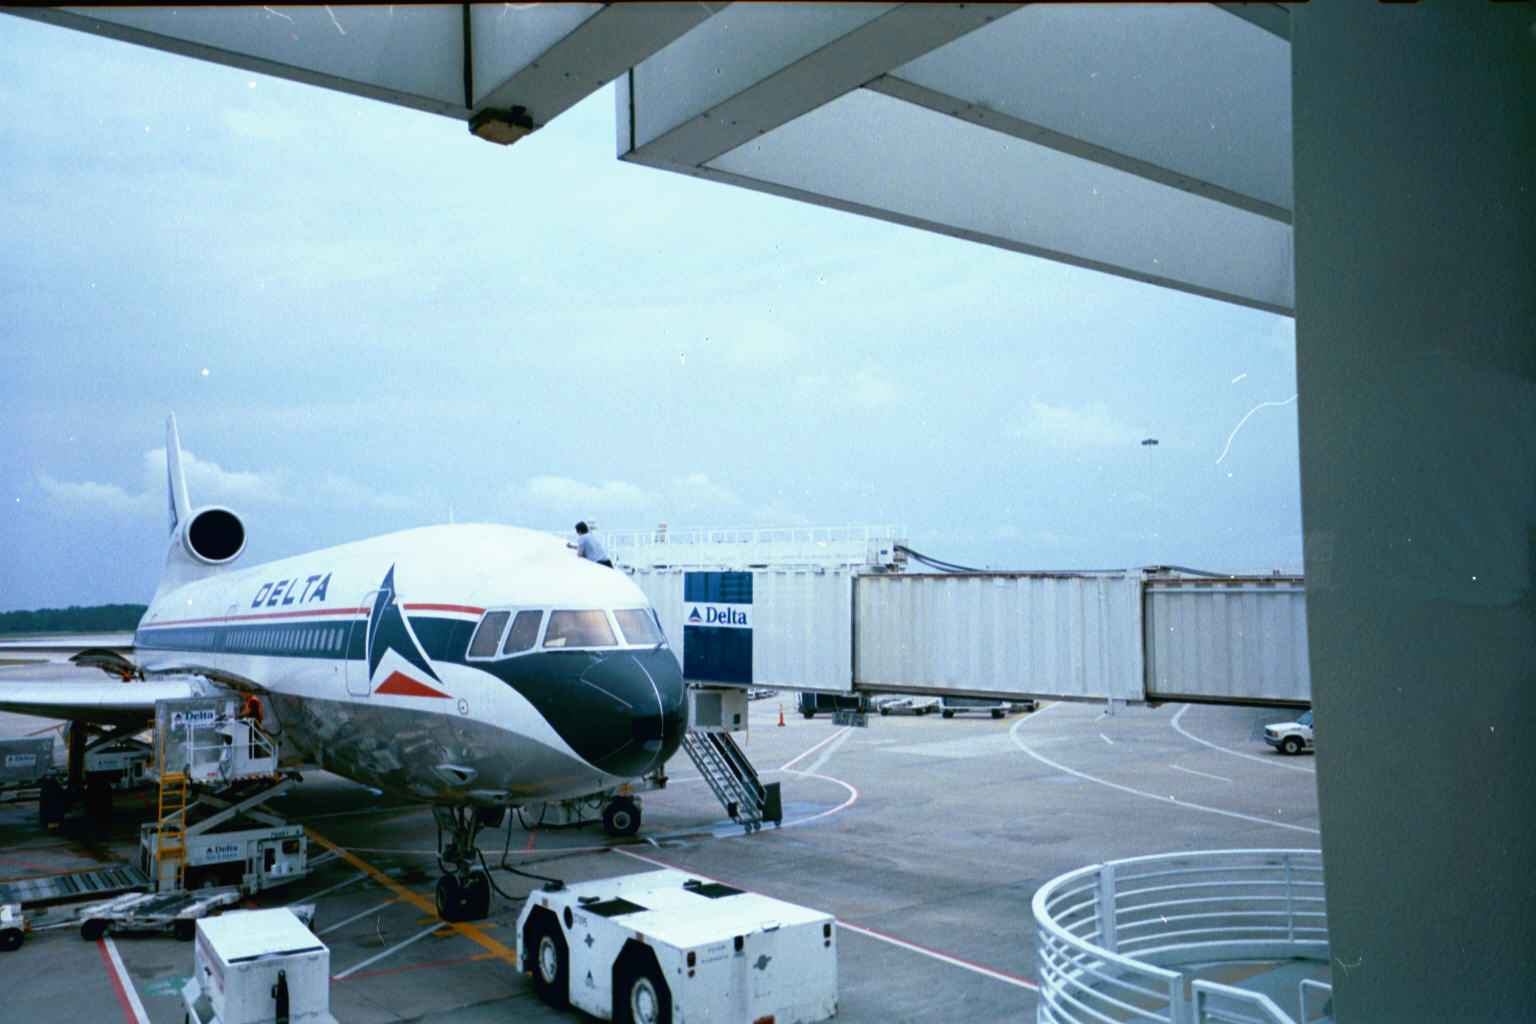 Why Delta Operated The Lockheed L-1011 TriStar